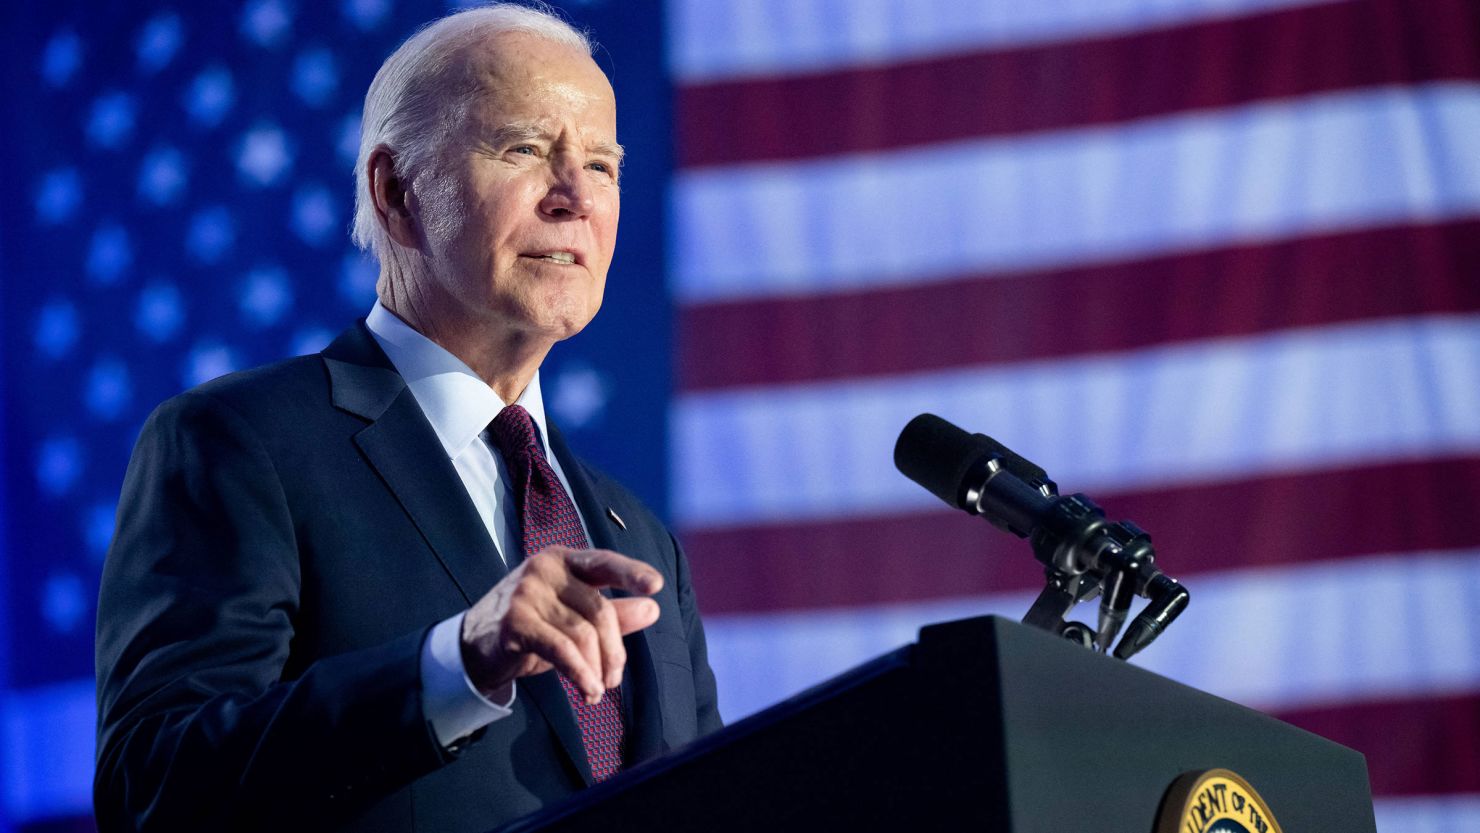 President Joe Biden speaks during a campaign rally at Pearson Community Center in Las Vegas, Nevada, on February 4.